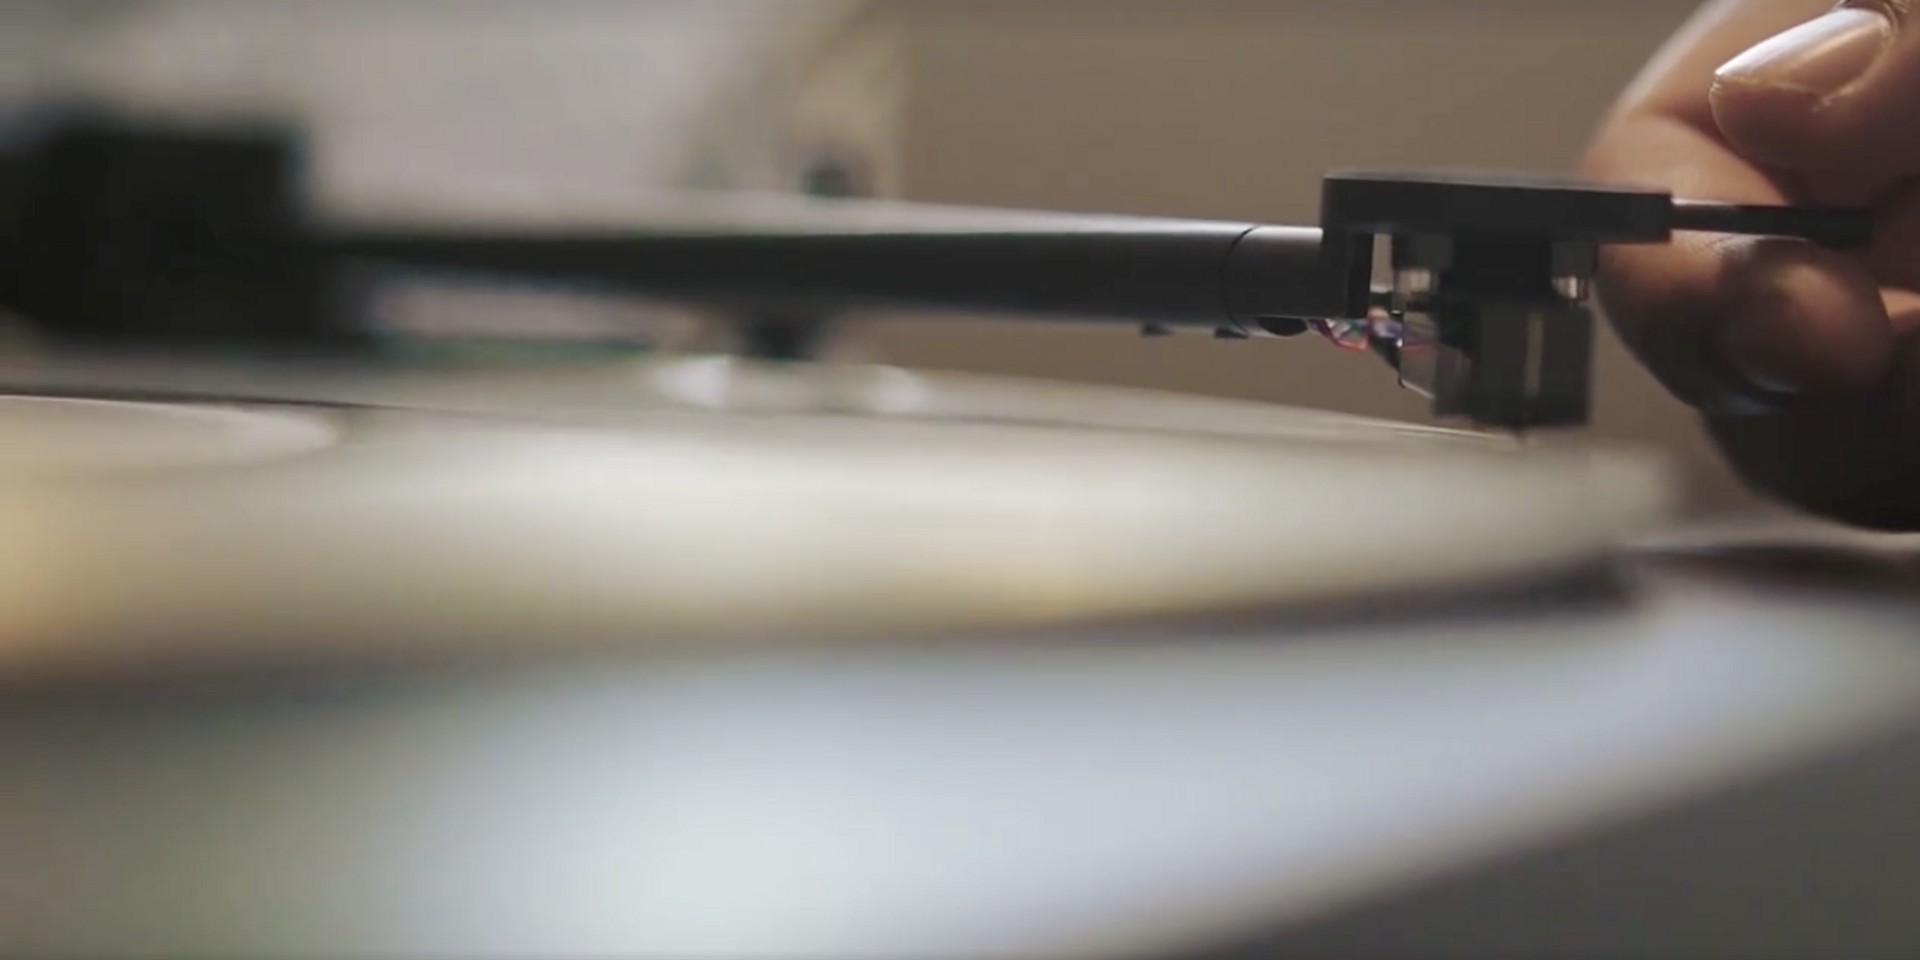 Sights & Sounds honours the age-old tradition of vinyl records